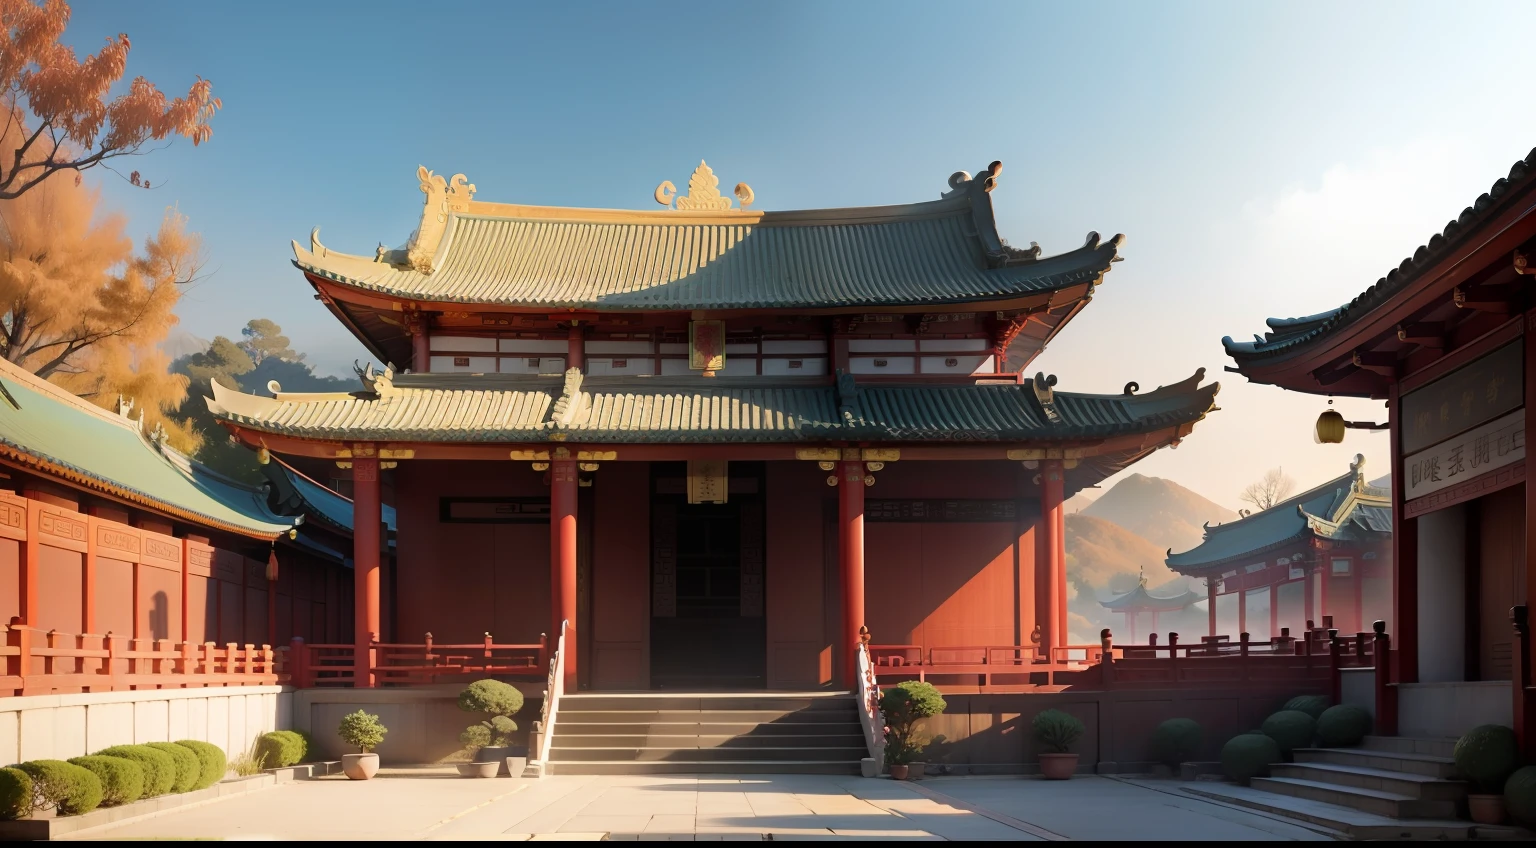 Chinese temple